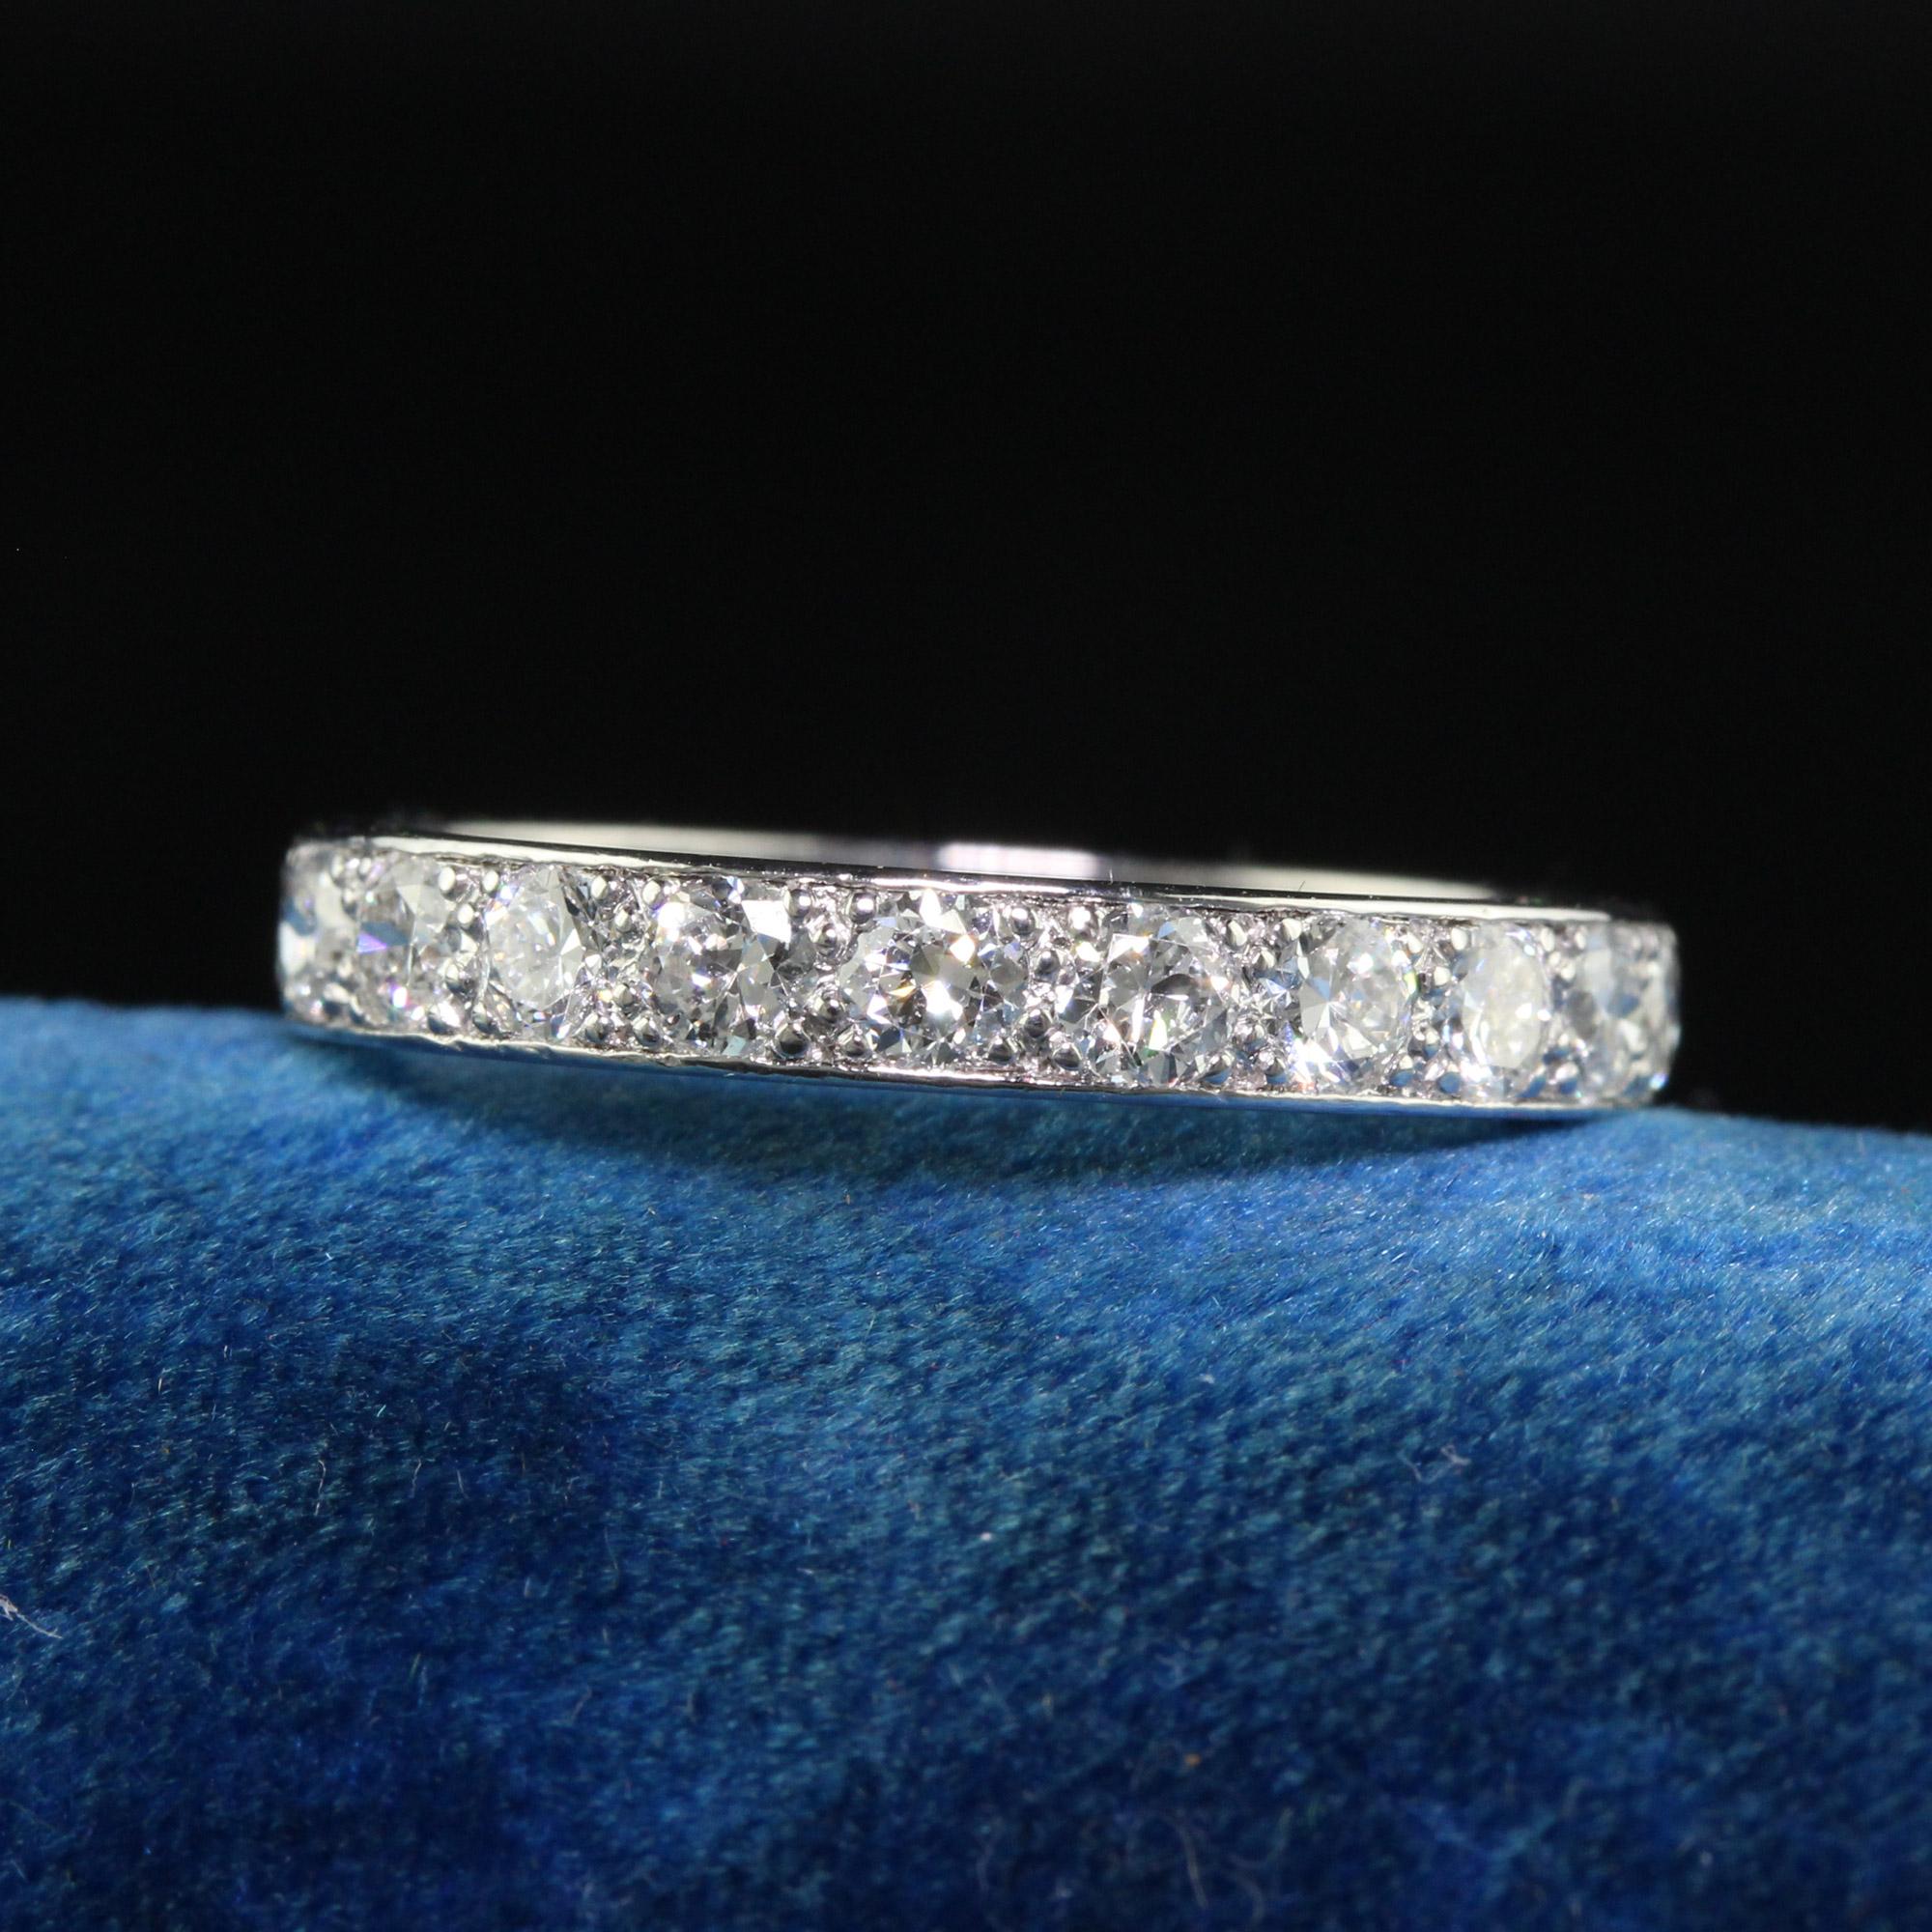 Beautiful Antique Art Deco Platinum Old European Diamond Eternity Band - Size 5 3/4. This classic old European diamond eternity band is crafted in platinum. There are gorgeous white old European cut diamonds set around the entire band. The ring is